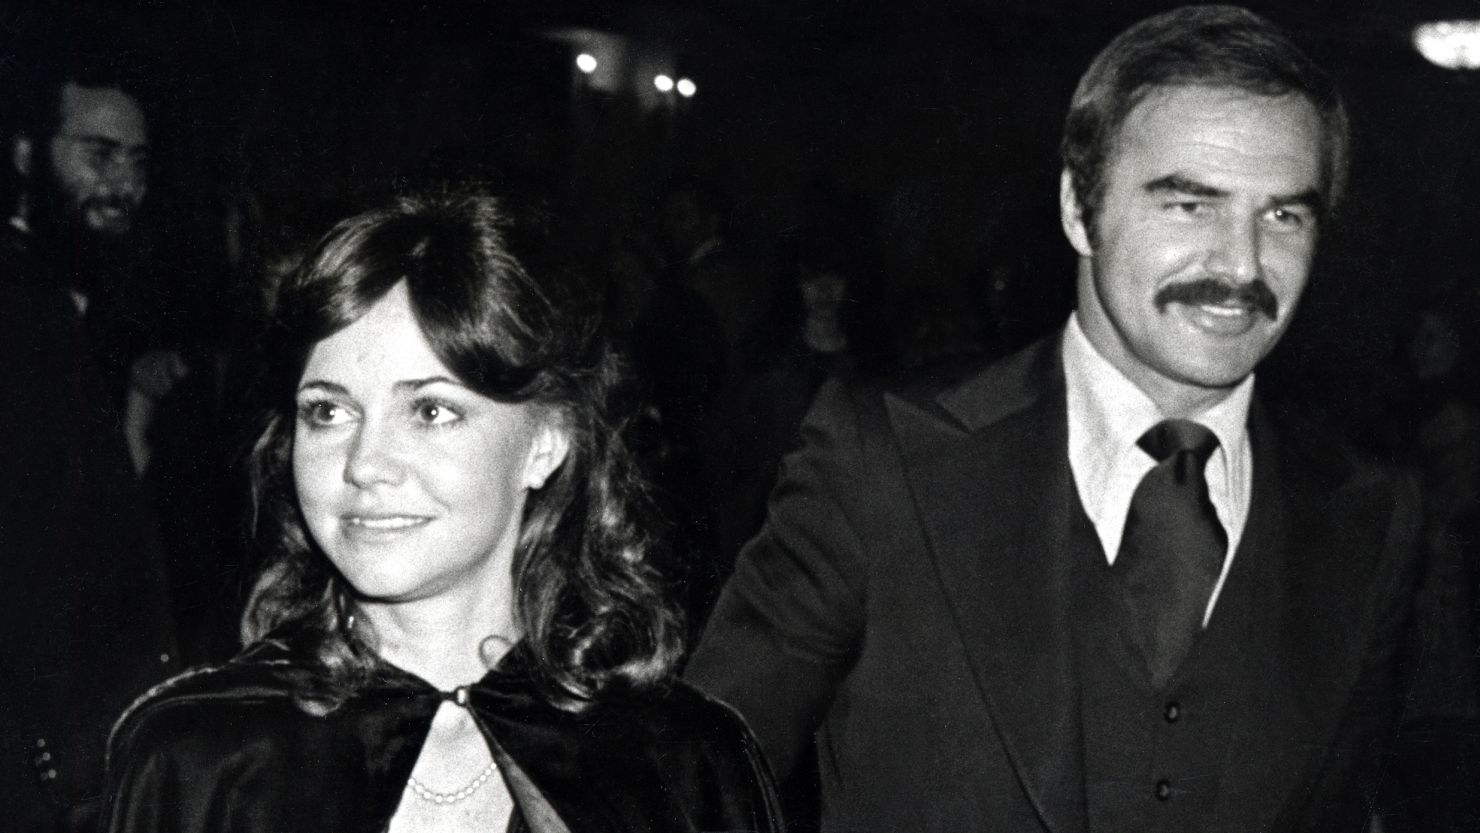 Sally Field and Burt Reynolds had a tumultuous relationship, according to Field.